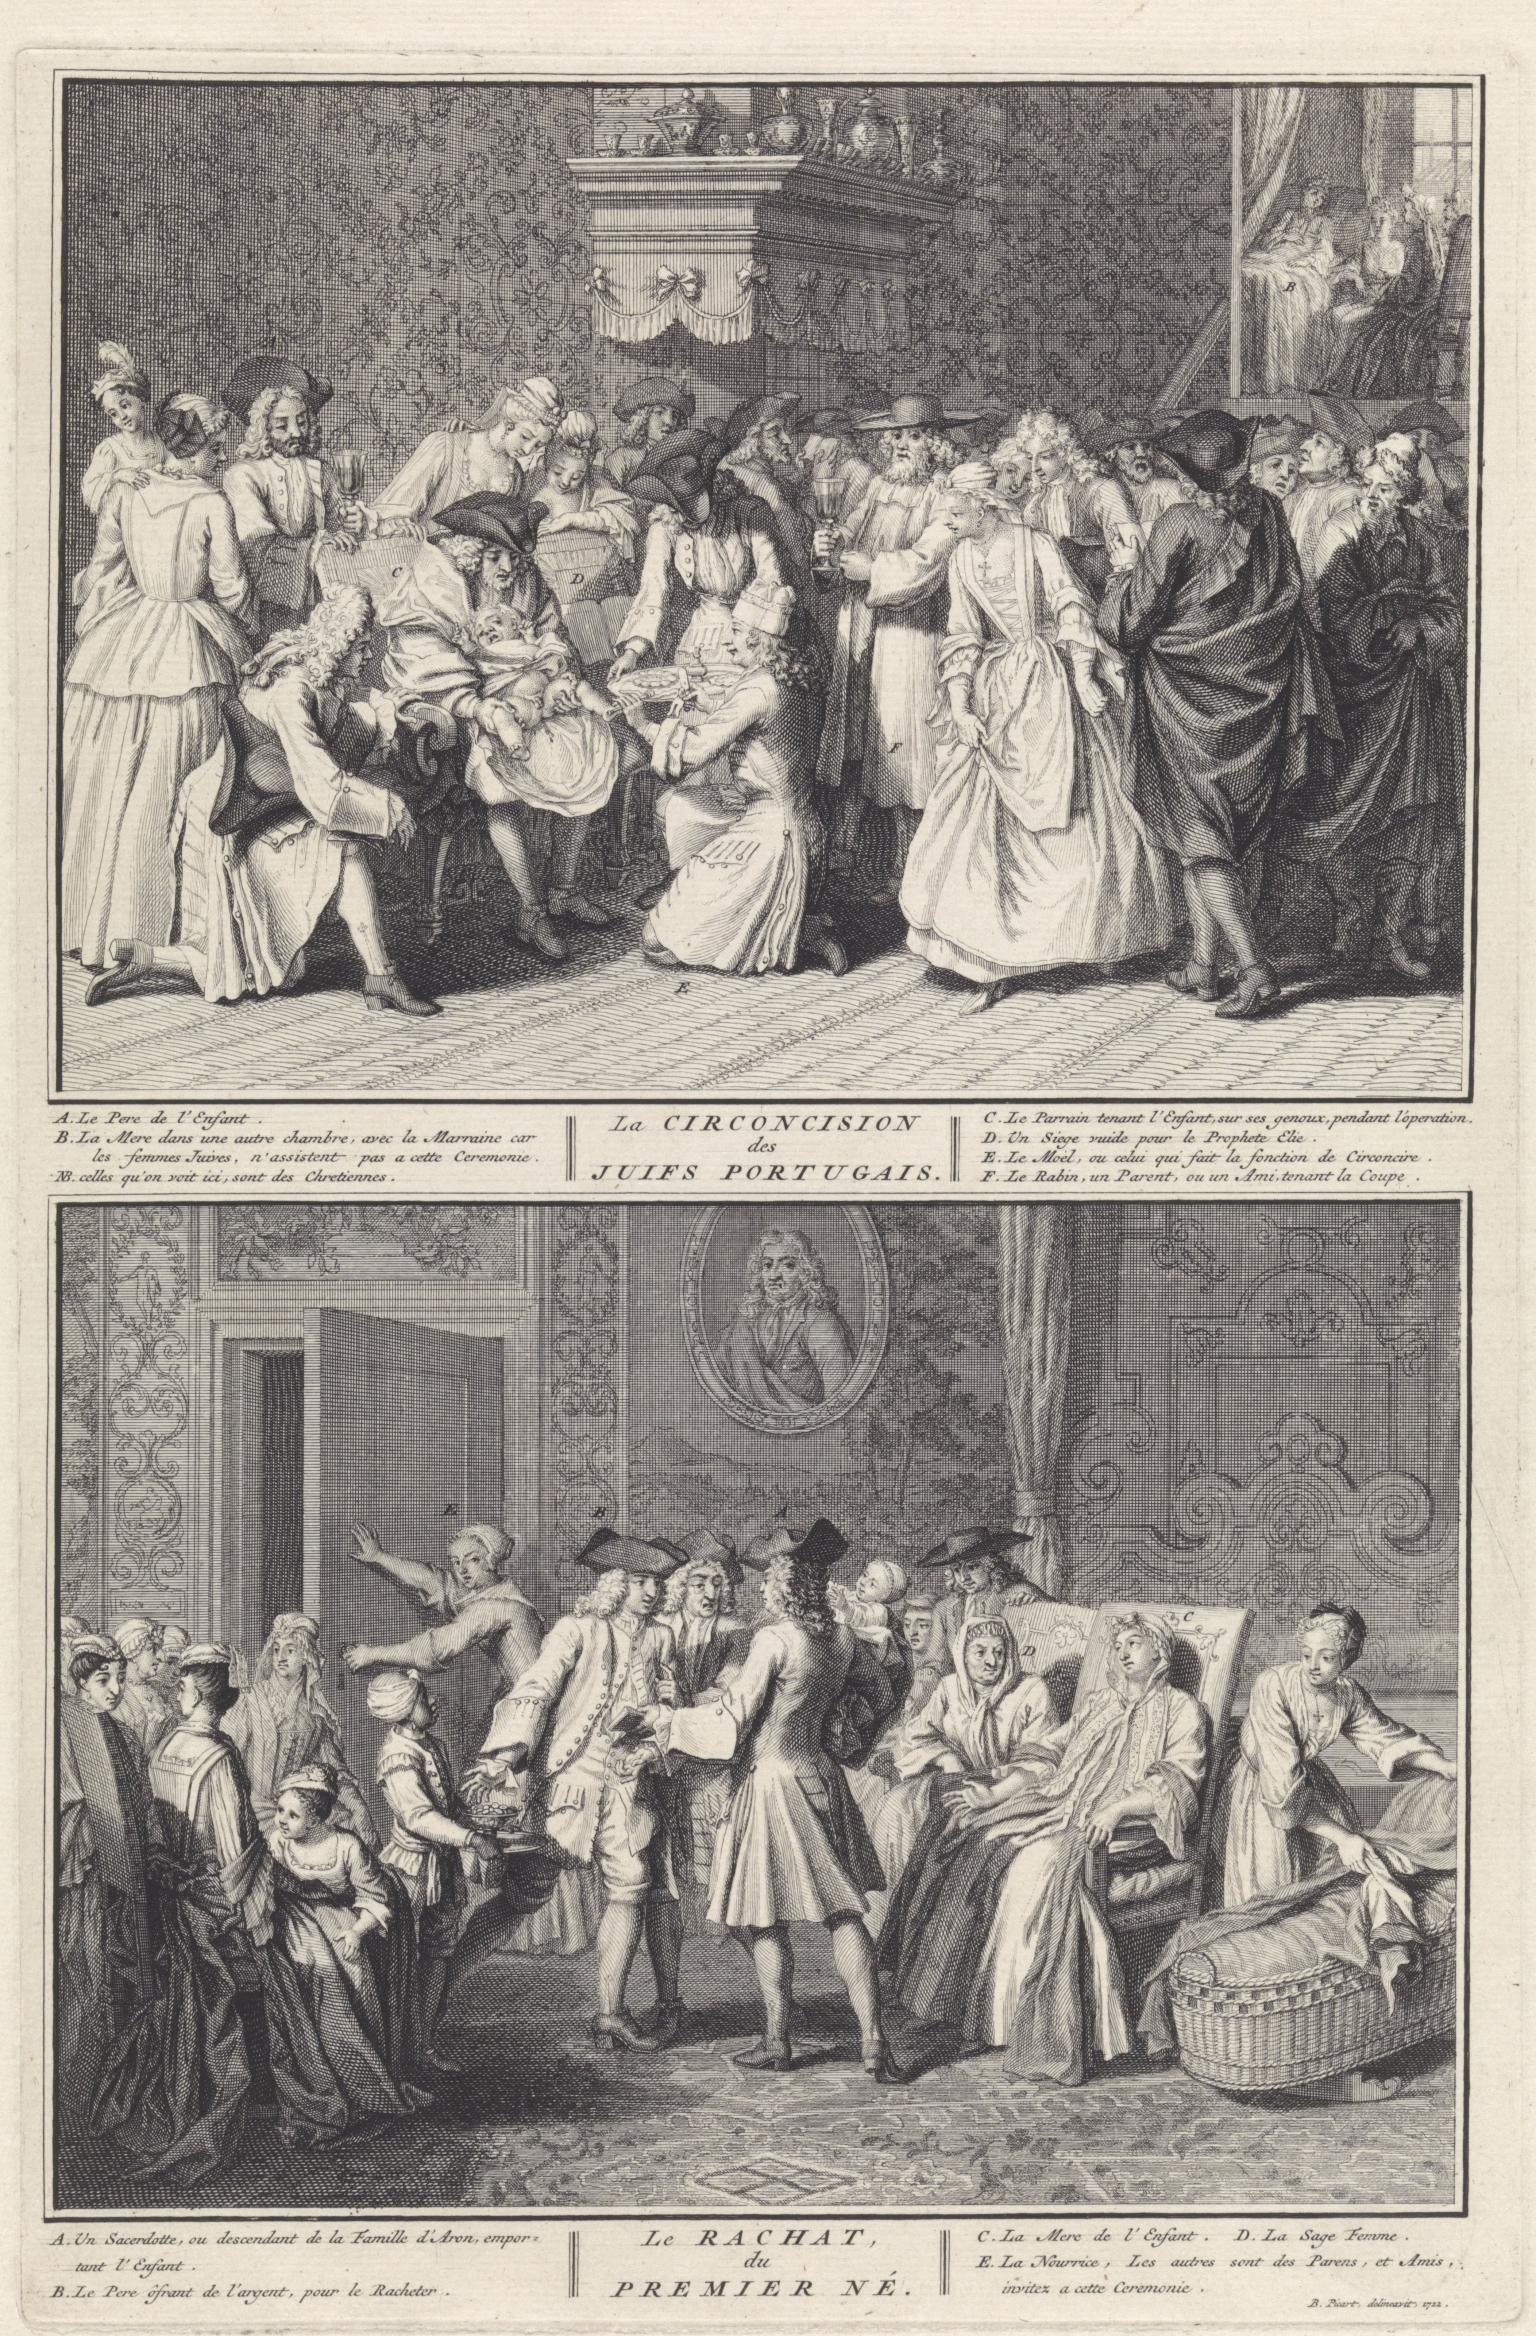 Print of two scenes, both with French text below: the top of baby on man's lap surrounded by people with bed in background, the bottom showing many people in ornate room with baby crib. 